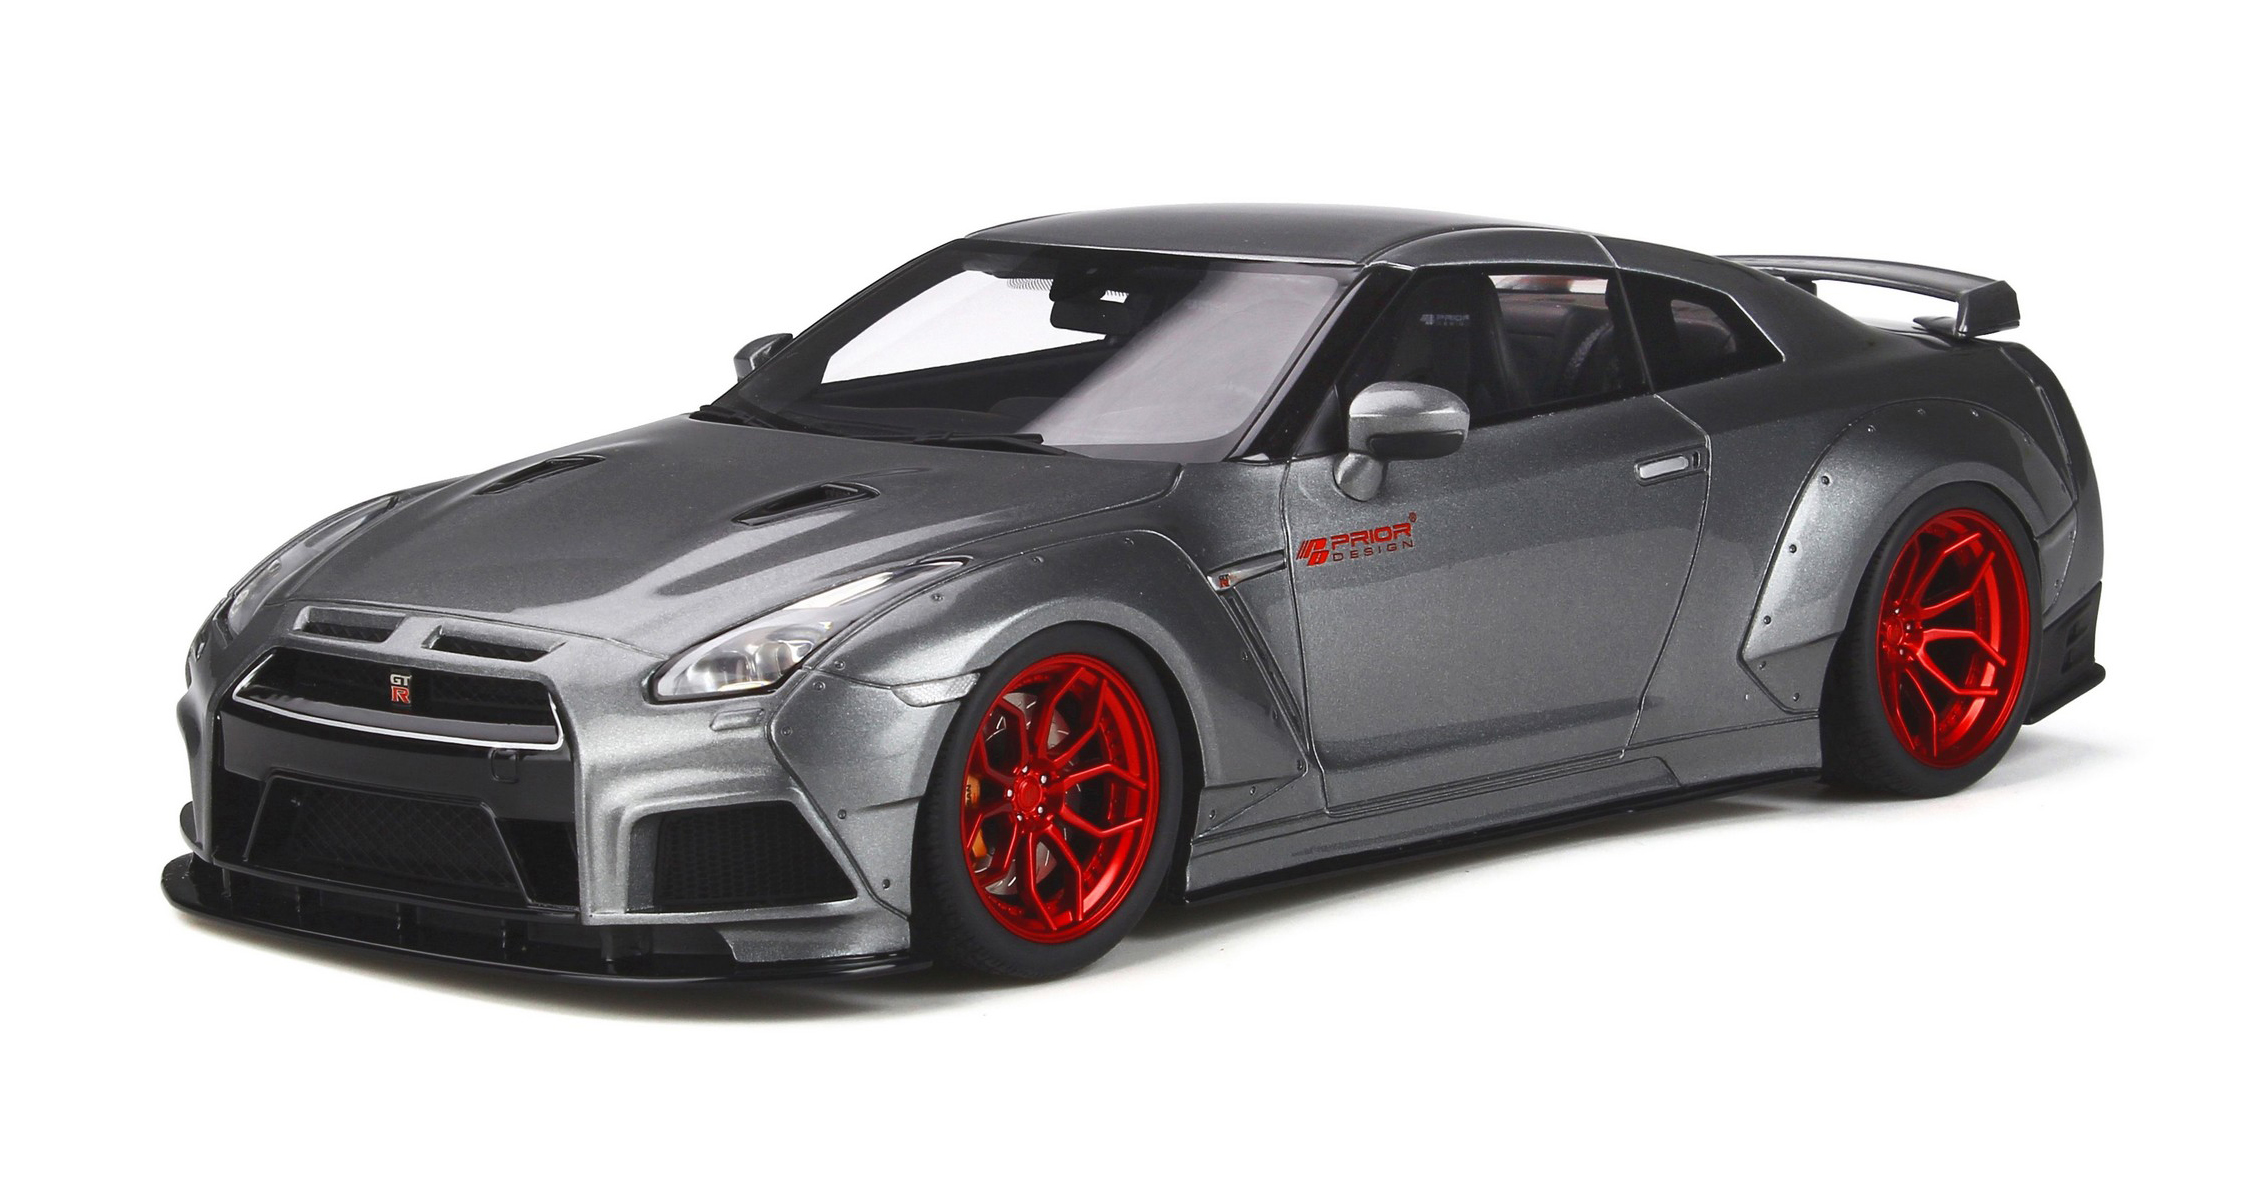 Nissan Gt-r R35 Metallic Gray With Red Wheels Modified By Prior Design Limited Edition To 500 Pieces Worldwide 1/18 Model Car By Gt Spirit